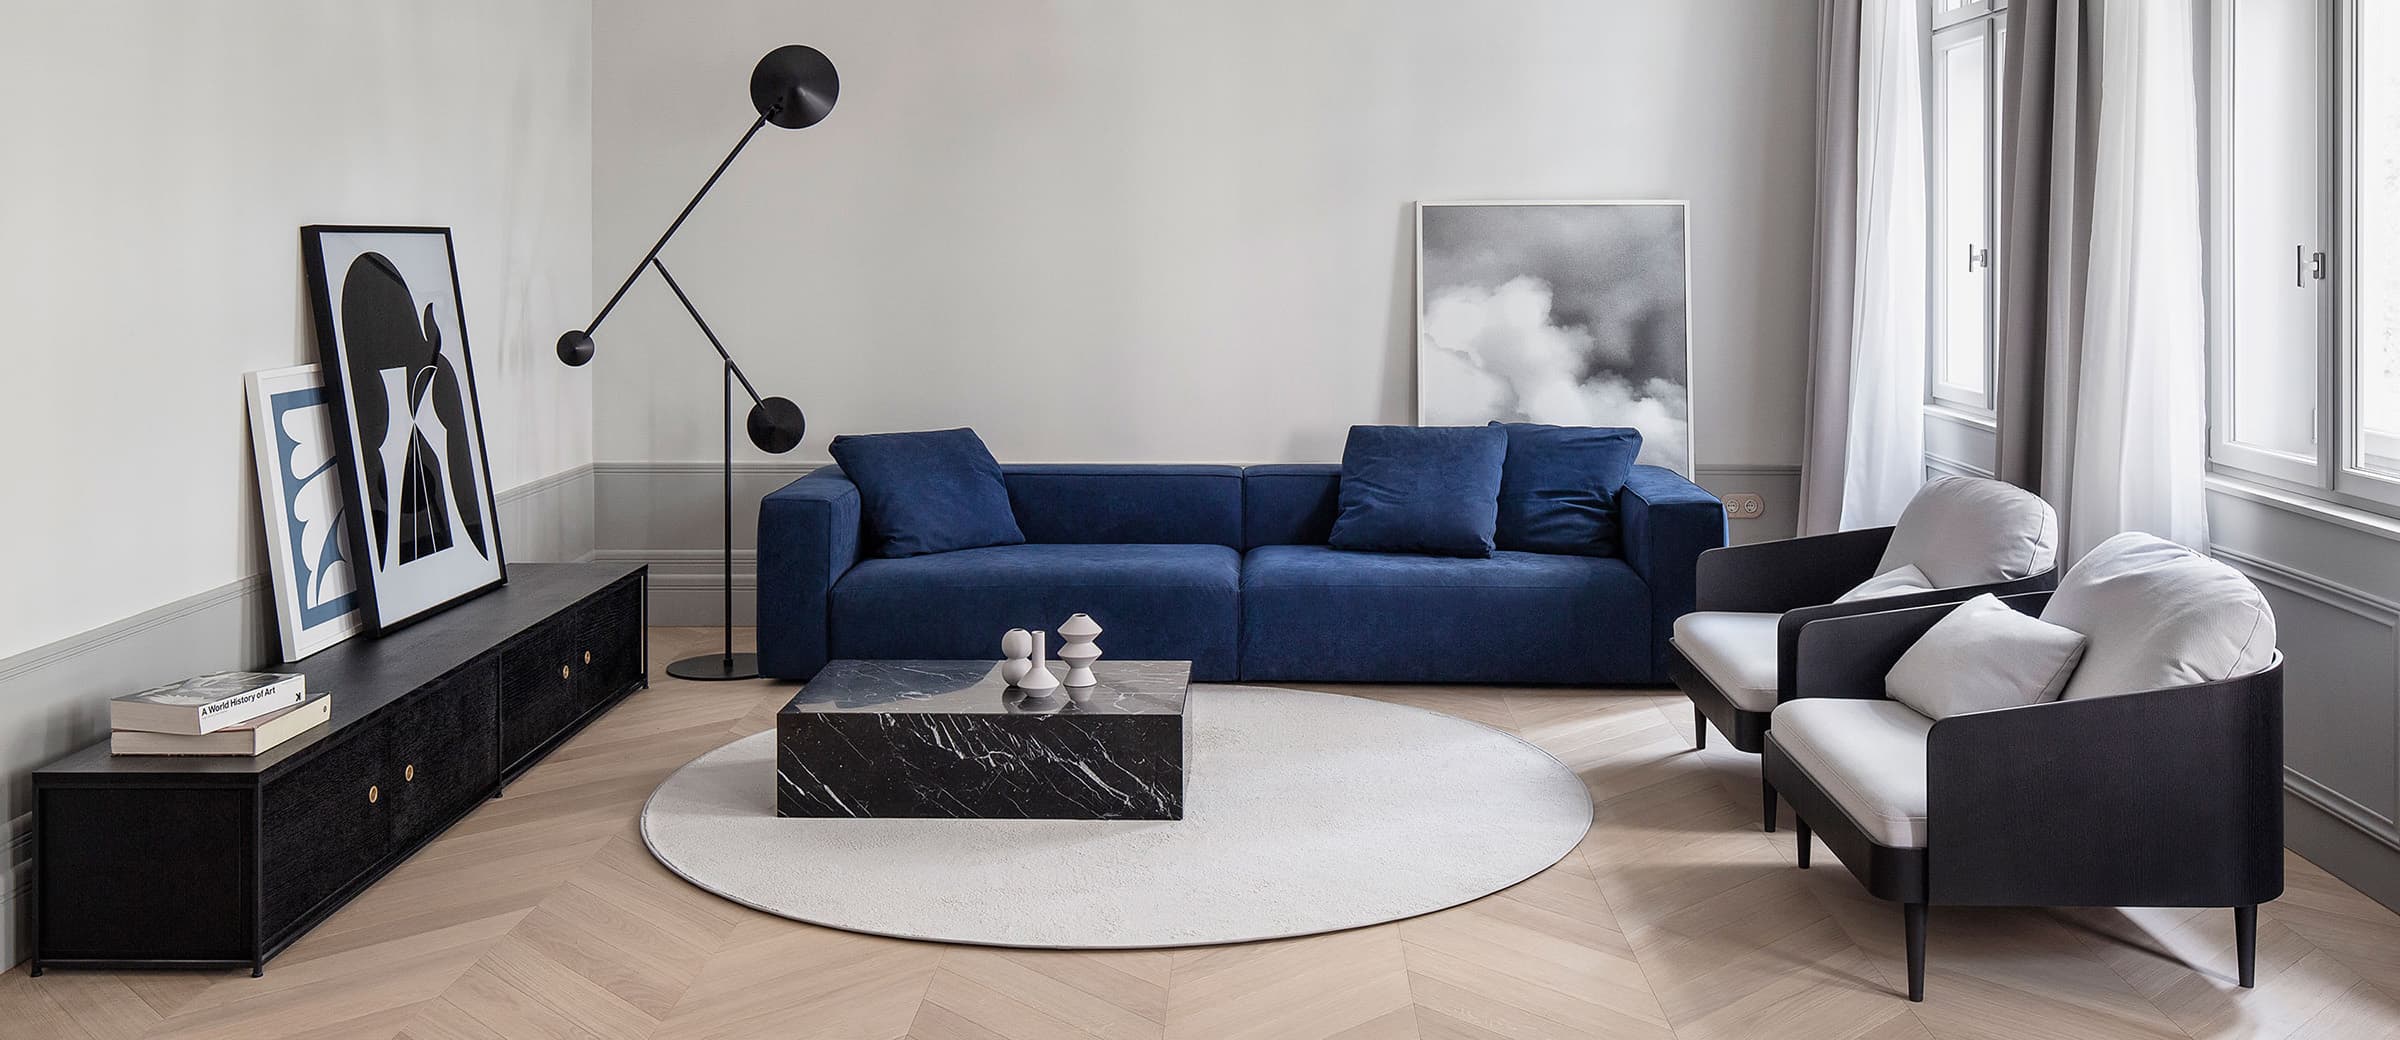 Sofa blue with black marble coffee table